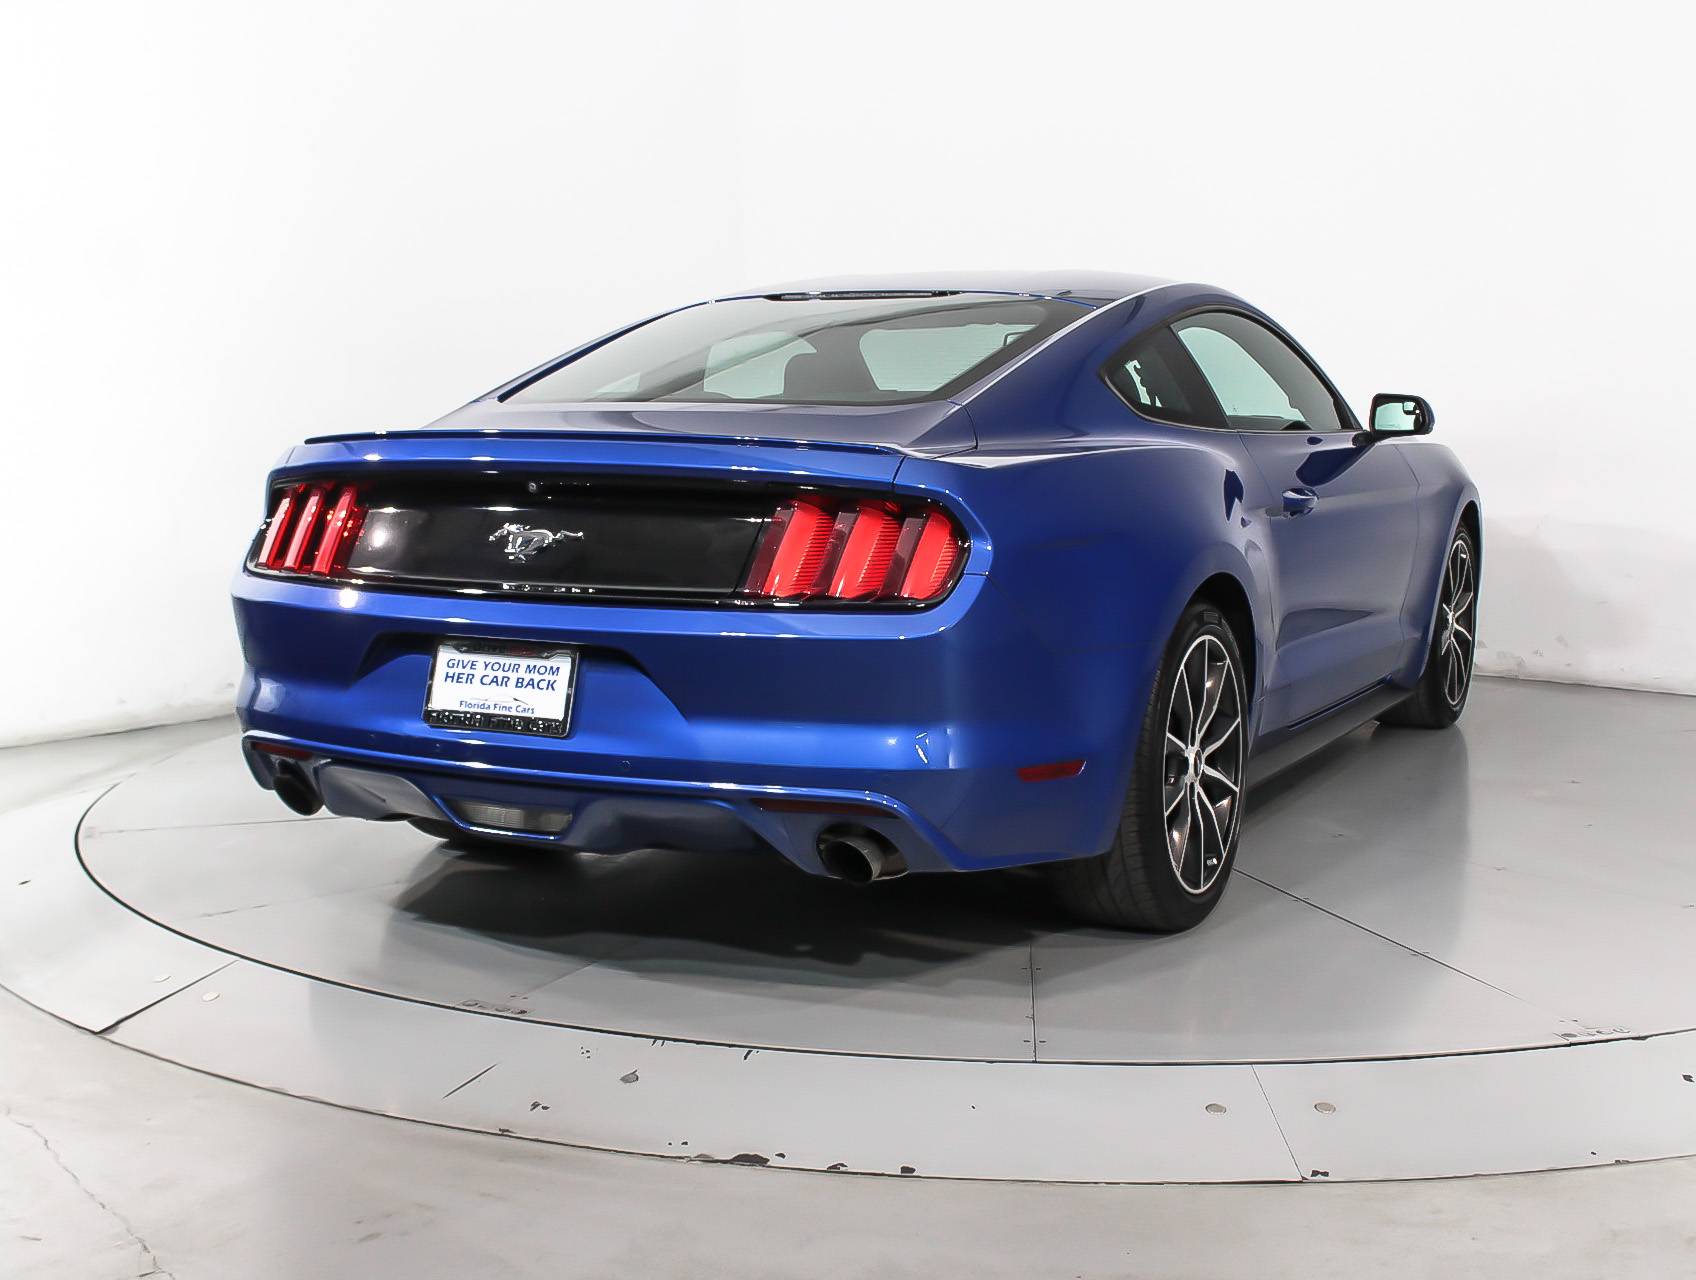 Florida Fine Cars - Used FORD MUSTANG 2017 HOLLYWOOD ECOBOOST